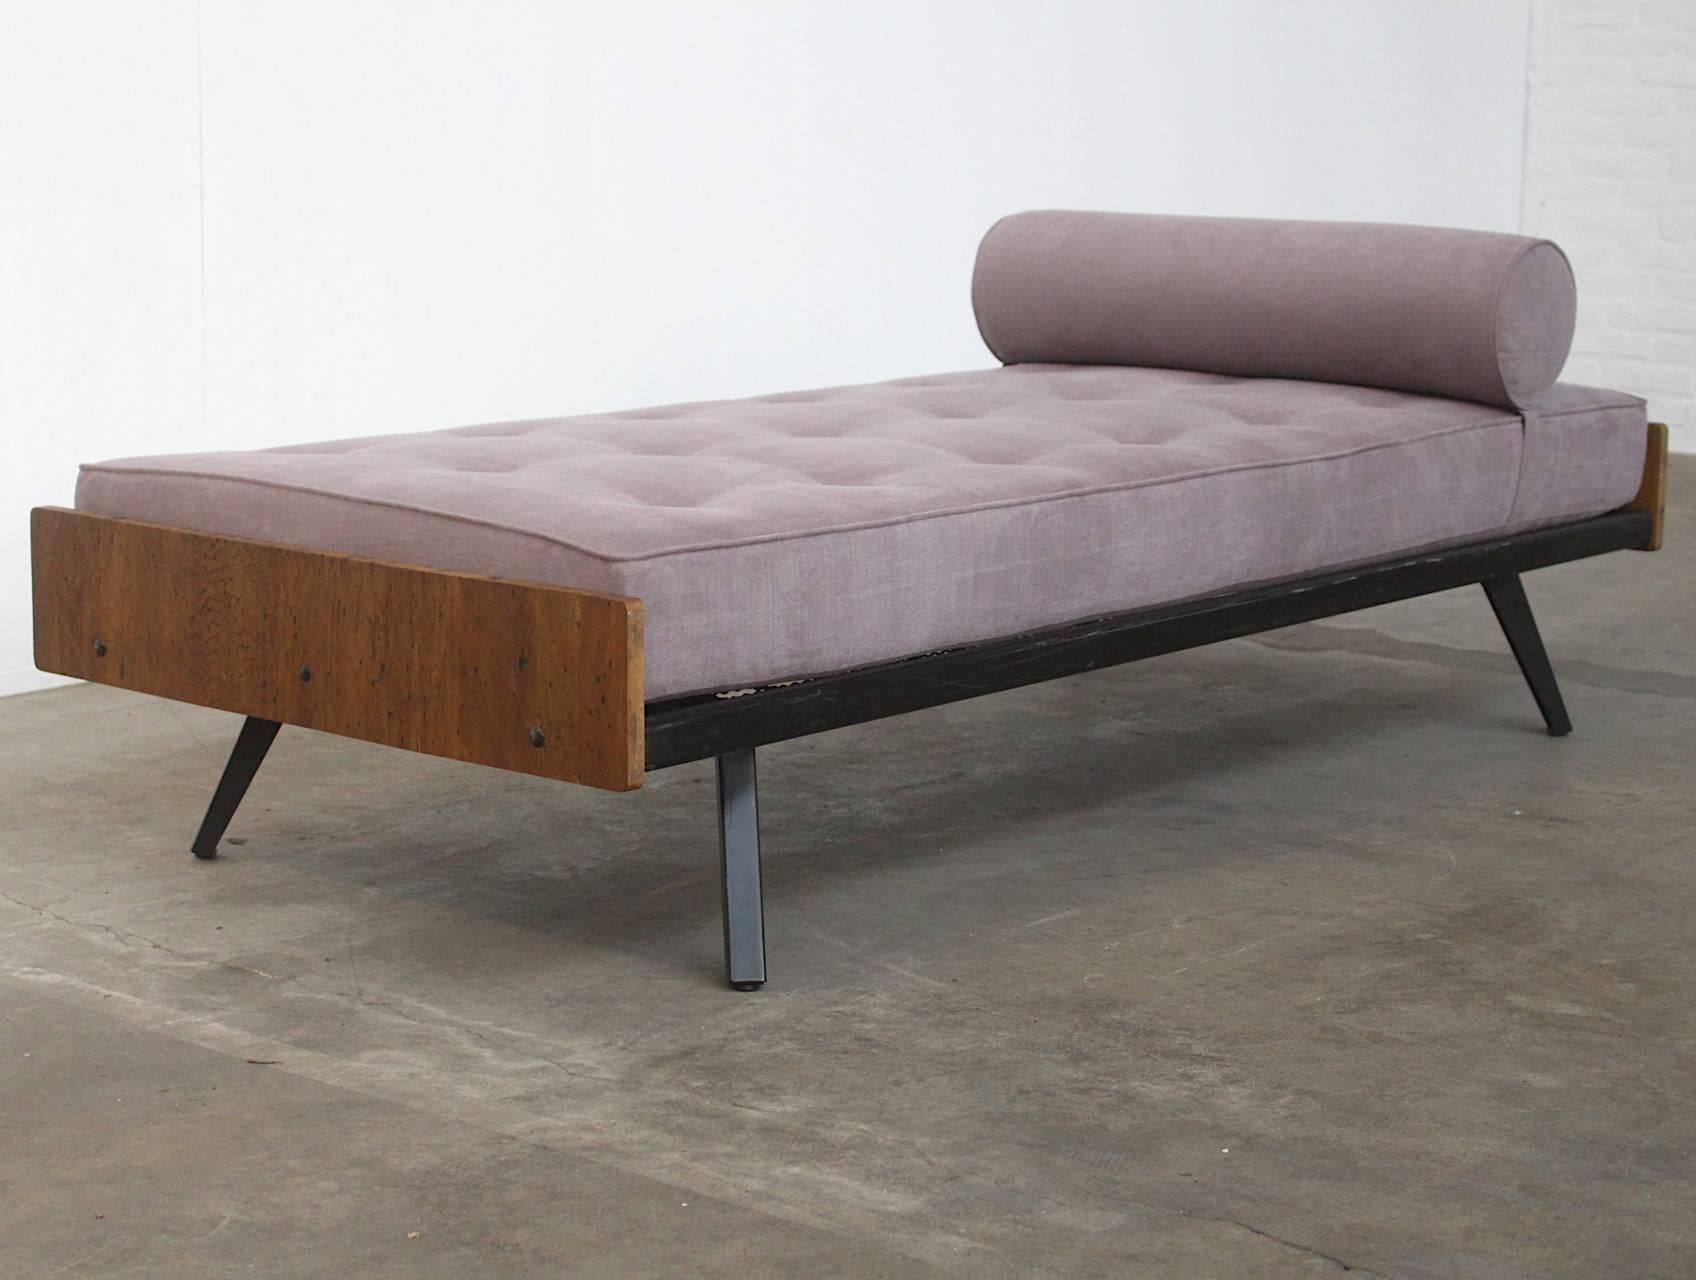 Mid-20th Century French Jean Prouvé style Daybed, ca 1950